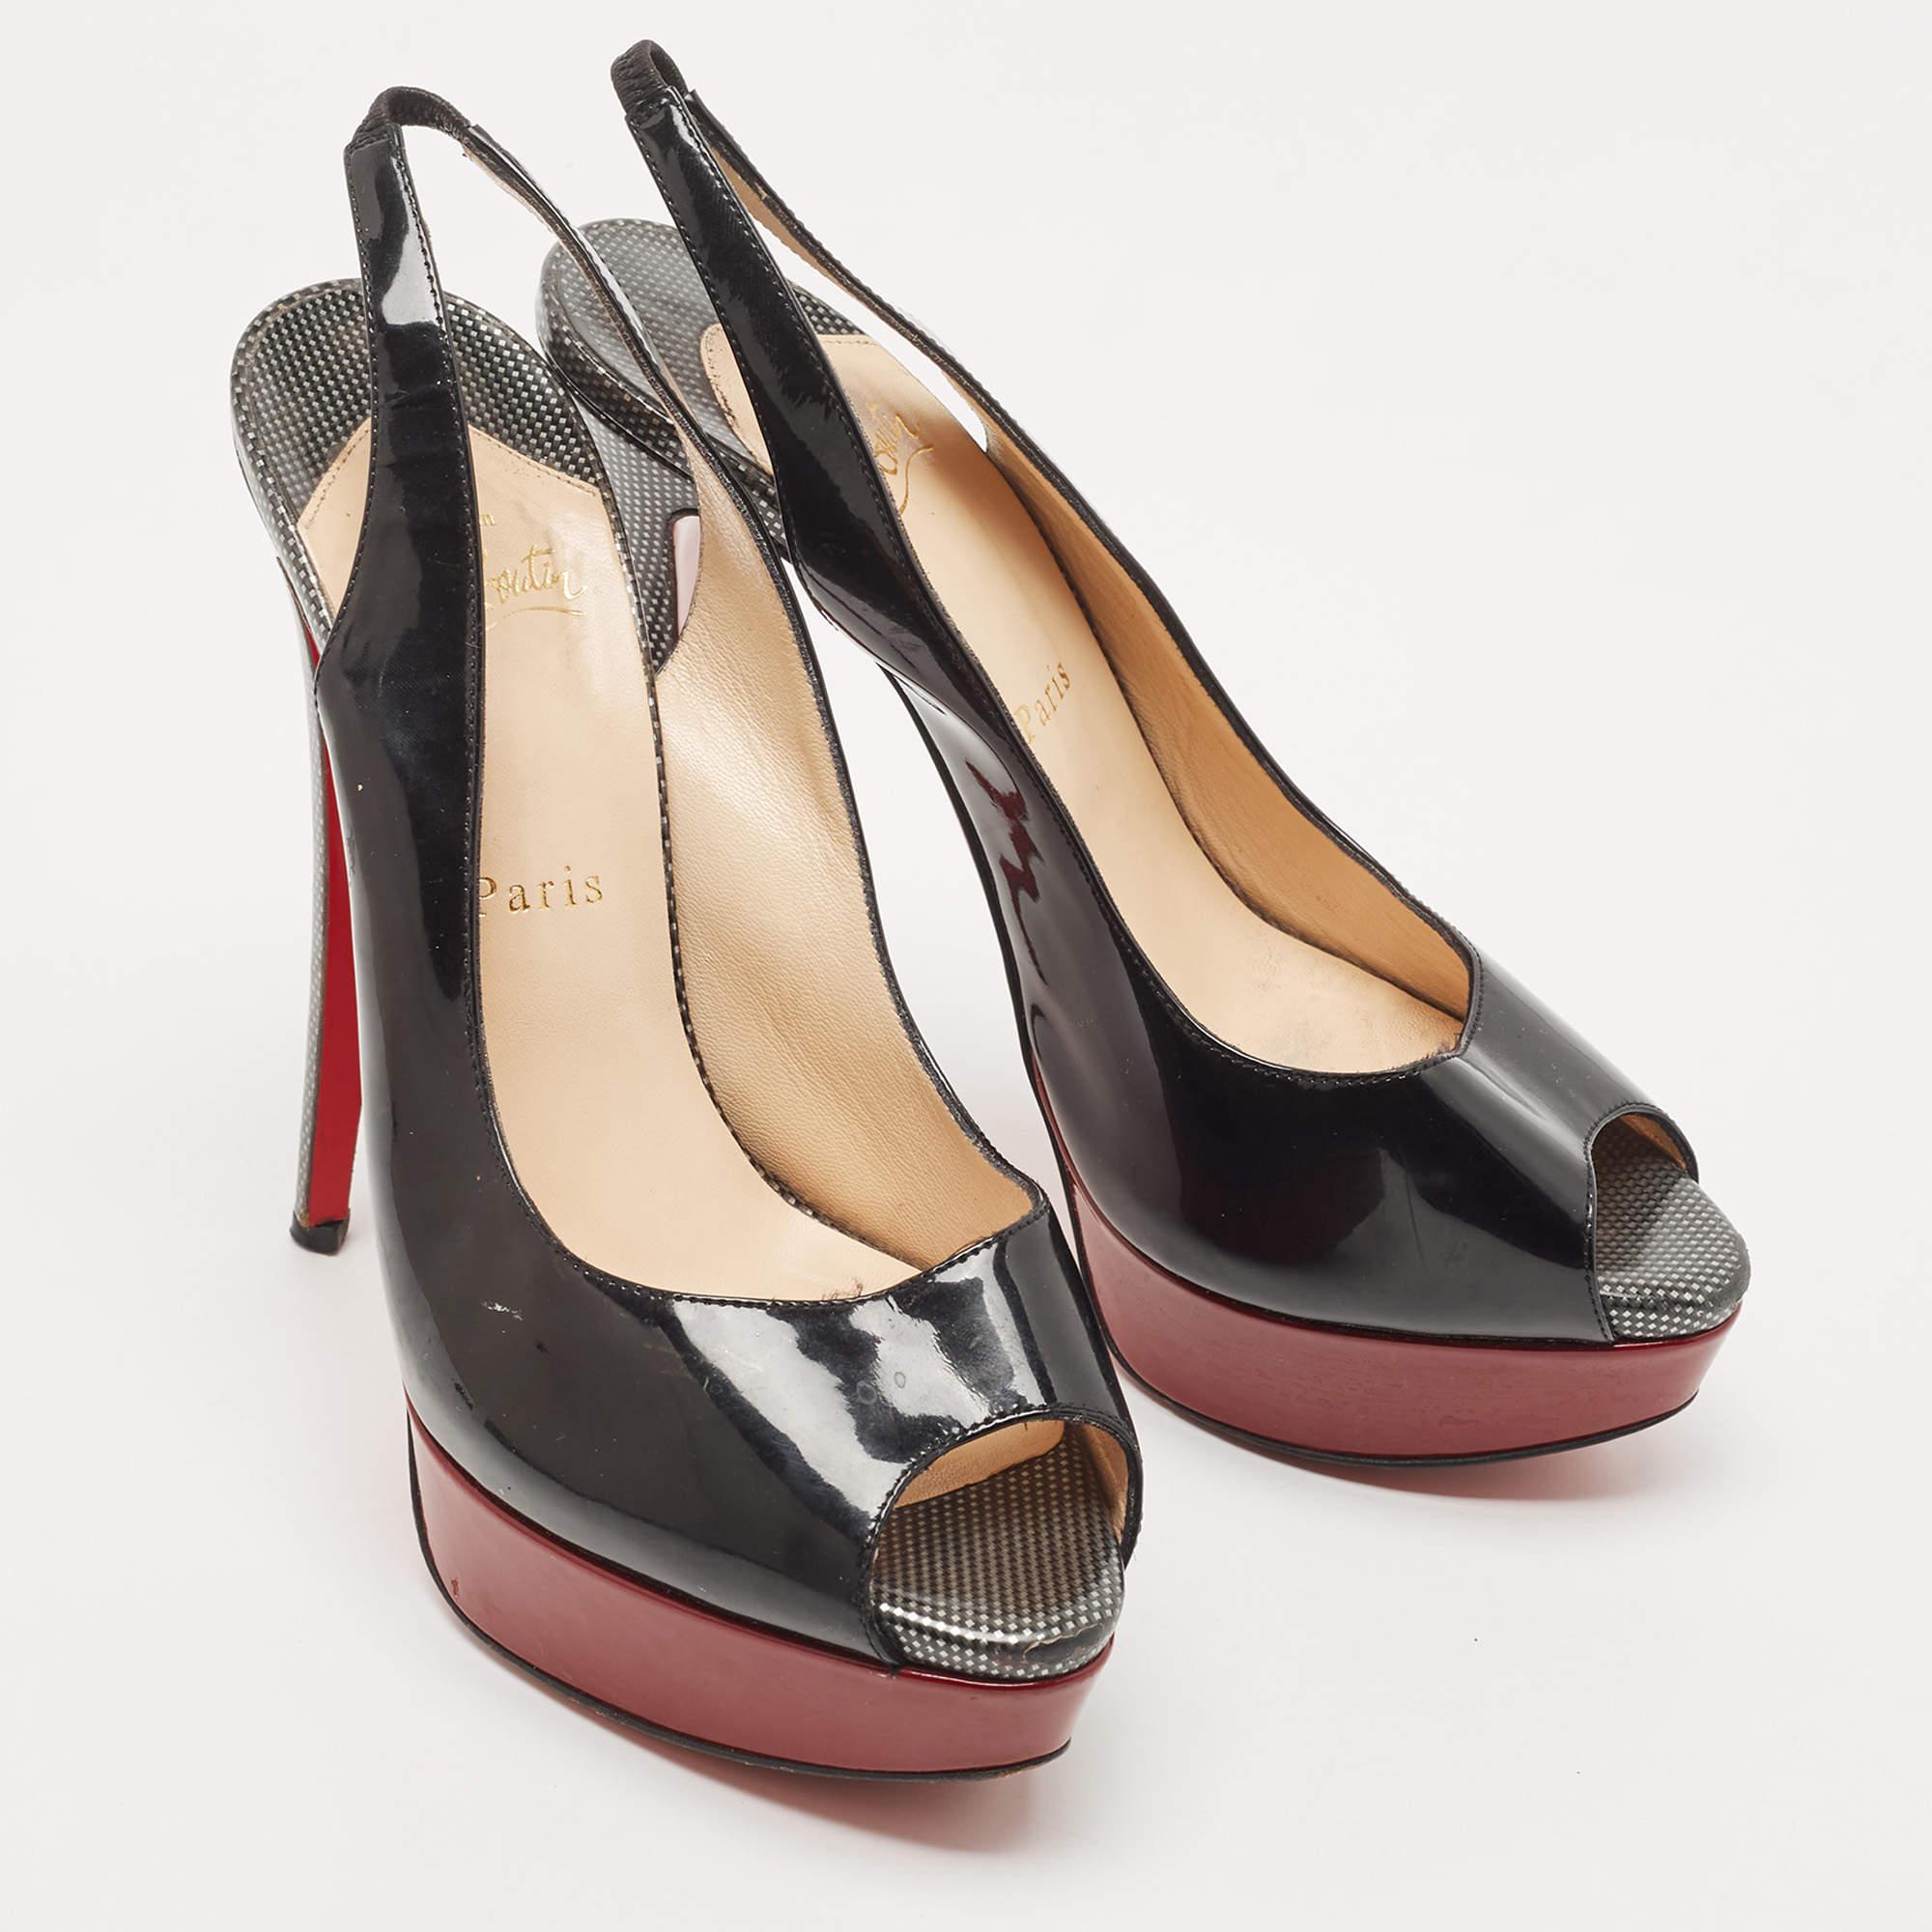 Stand out from the crowd with this luxurious pair of Louboutins that exude high fashion with class. Crafted from patent leather, this is a creation from their Lady Peep collection. It features a black shade with peep toes and an architectural shape.